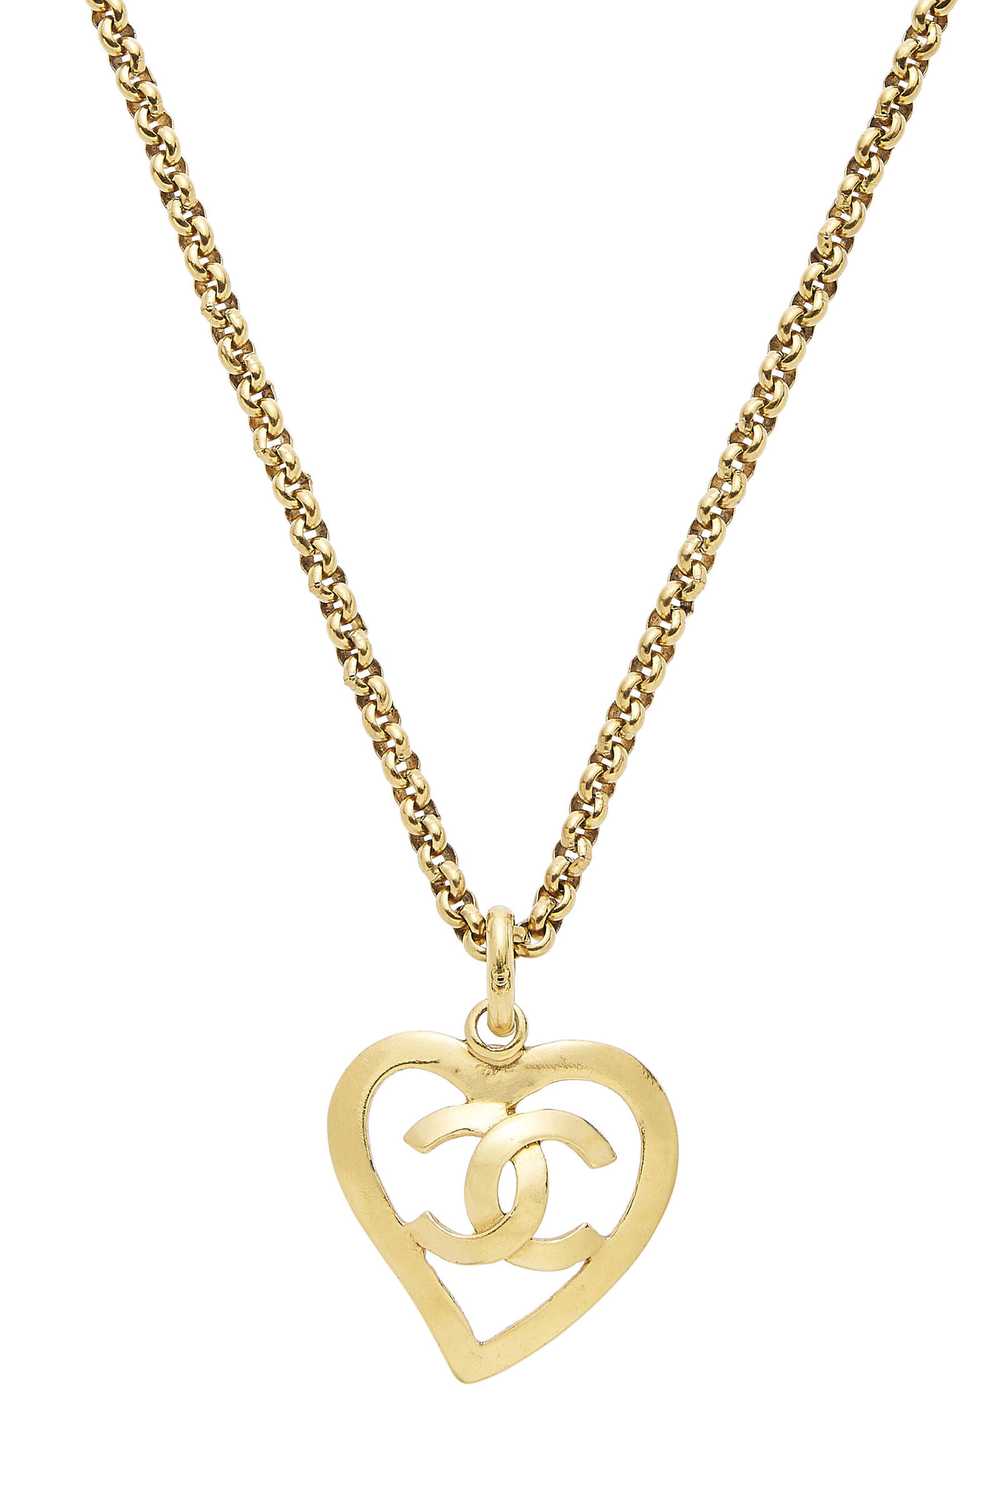 Gold 'CC' Open Heart Necklace - image 2